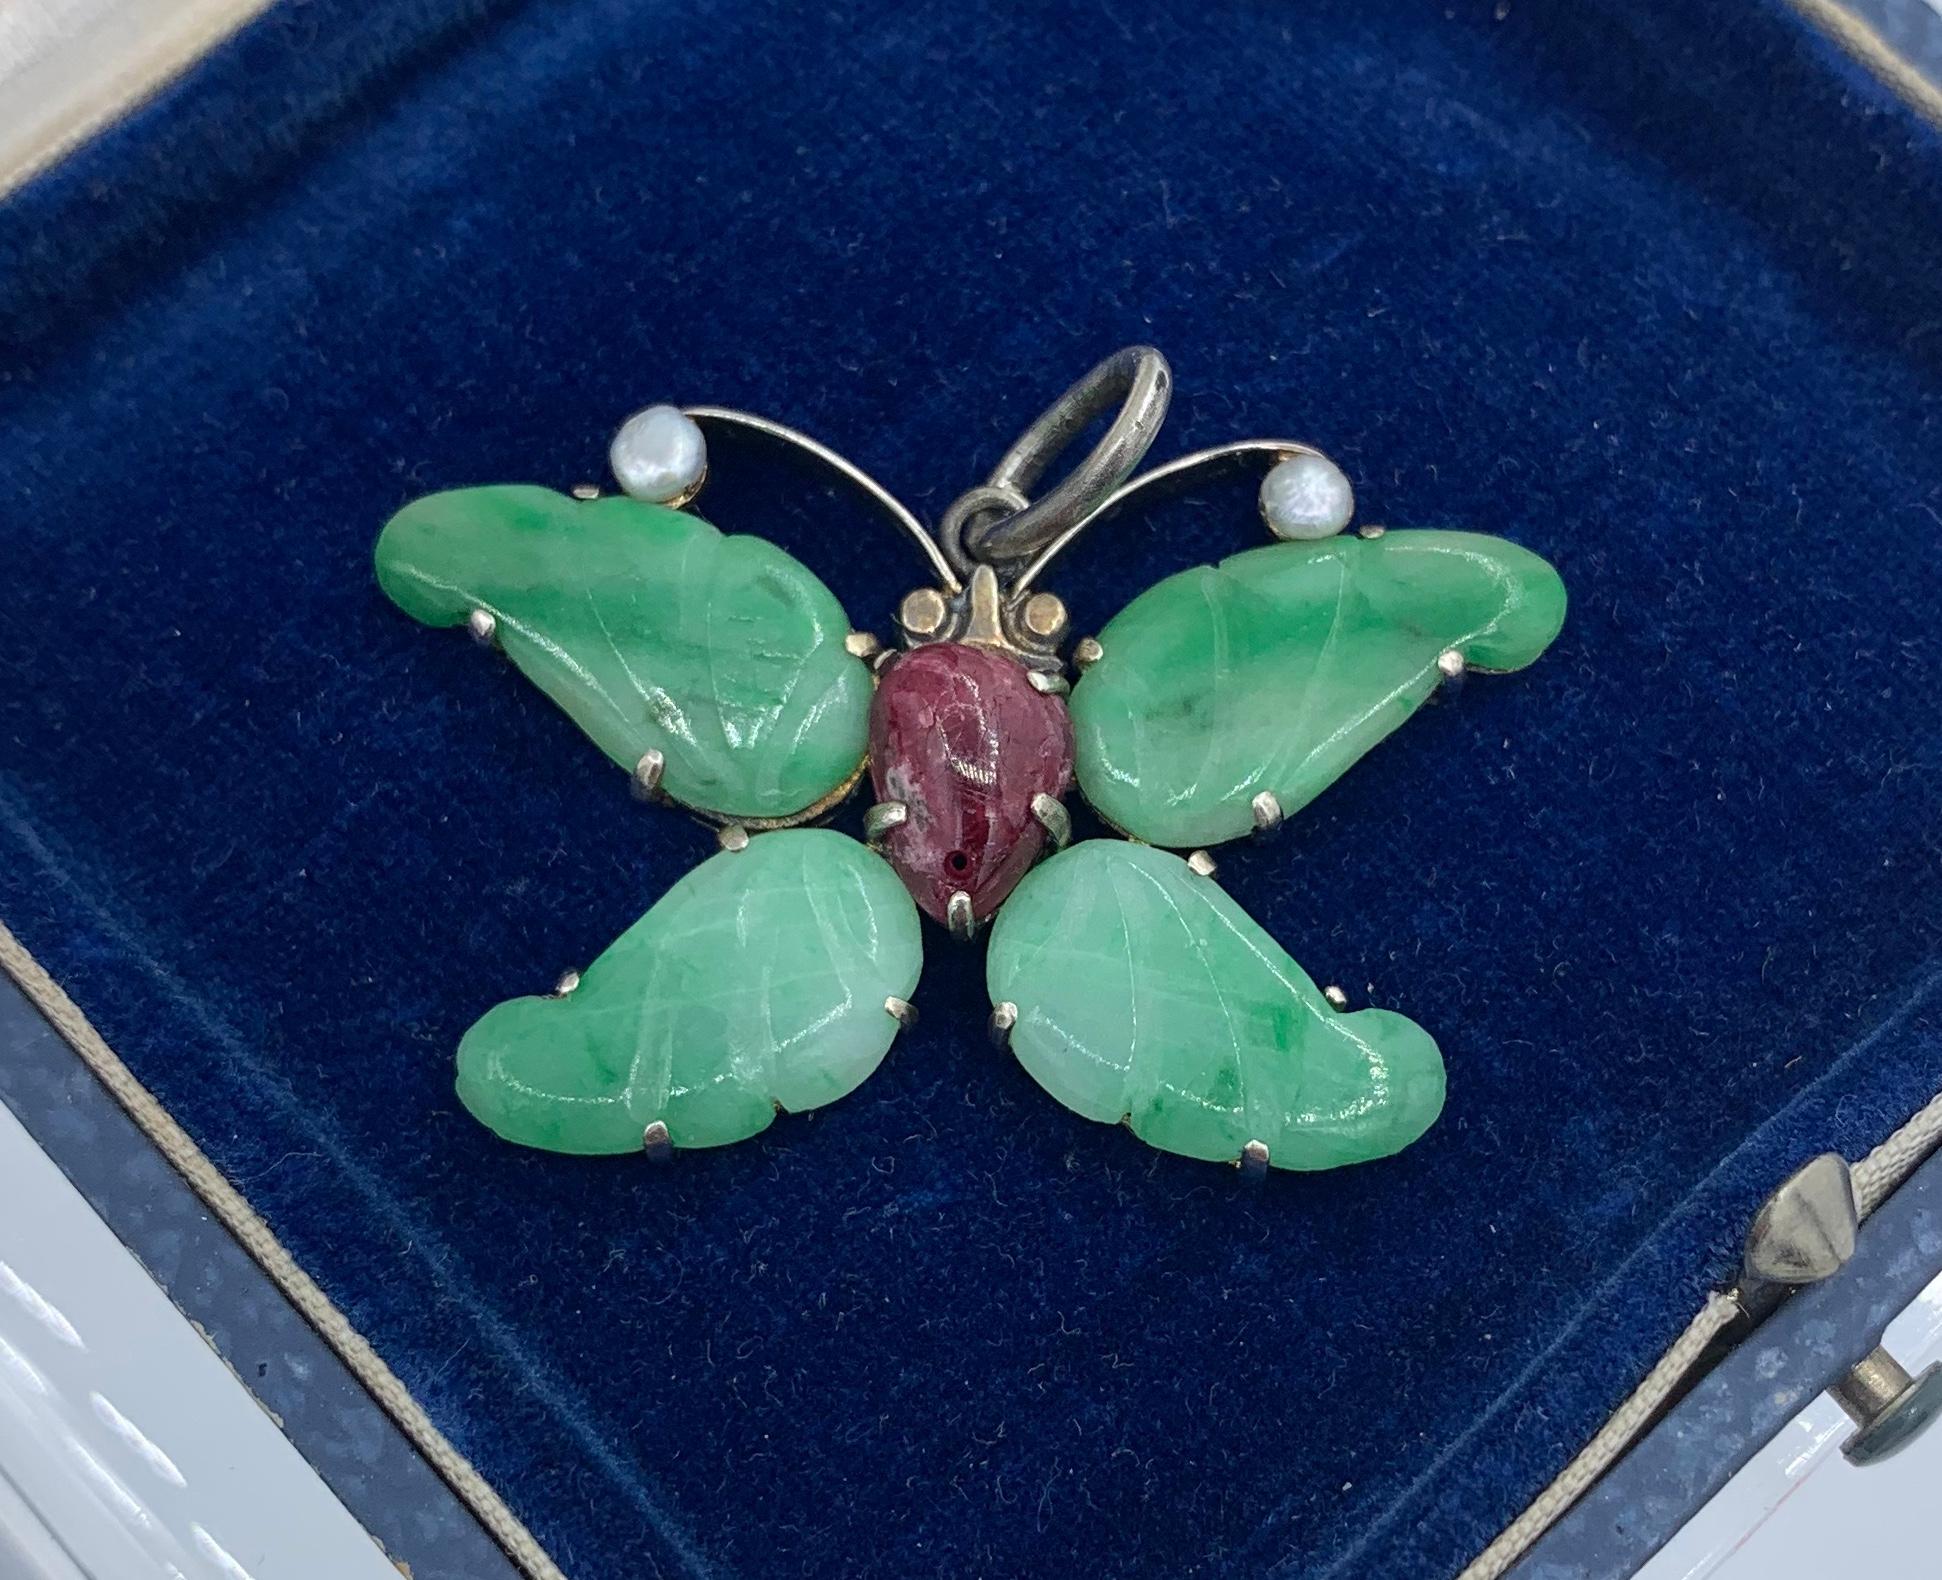 This is a stunning Jadeite Jade, Ruby and Pearl Art Nouveau - Art Deco Butterfly Insect Moth Pendant.  The wings of the butterfly are beautiful carved Jadeite Jade.  There is lovely variation within the Jade creating the colors of the wings.  The